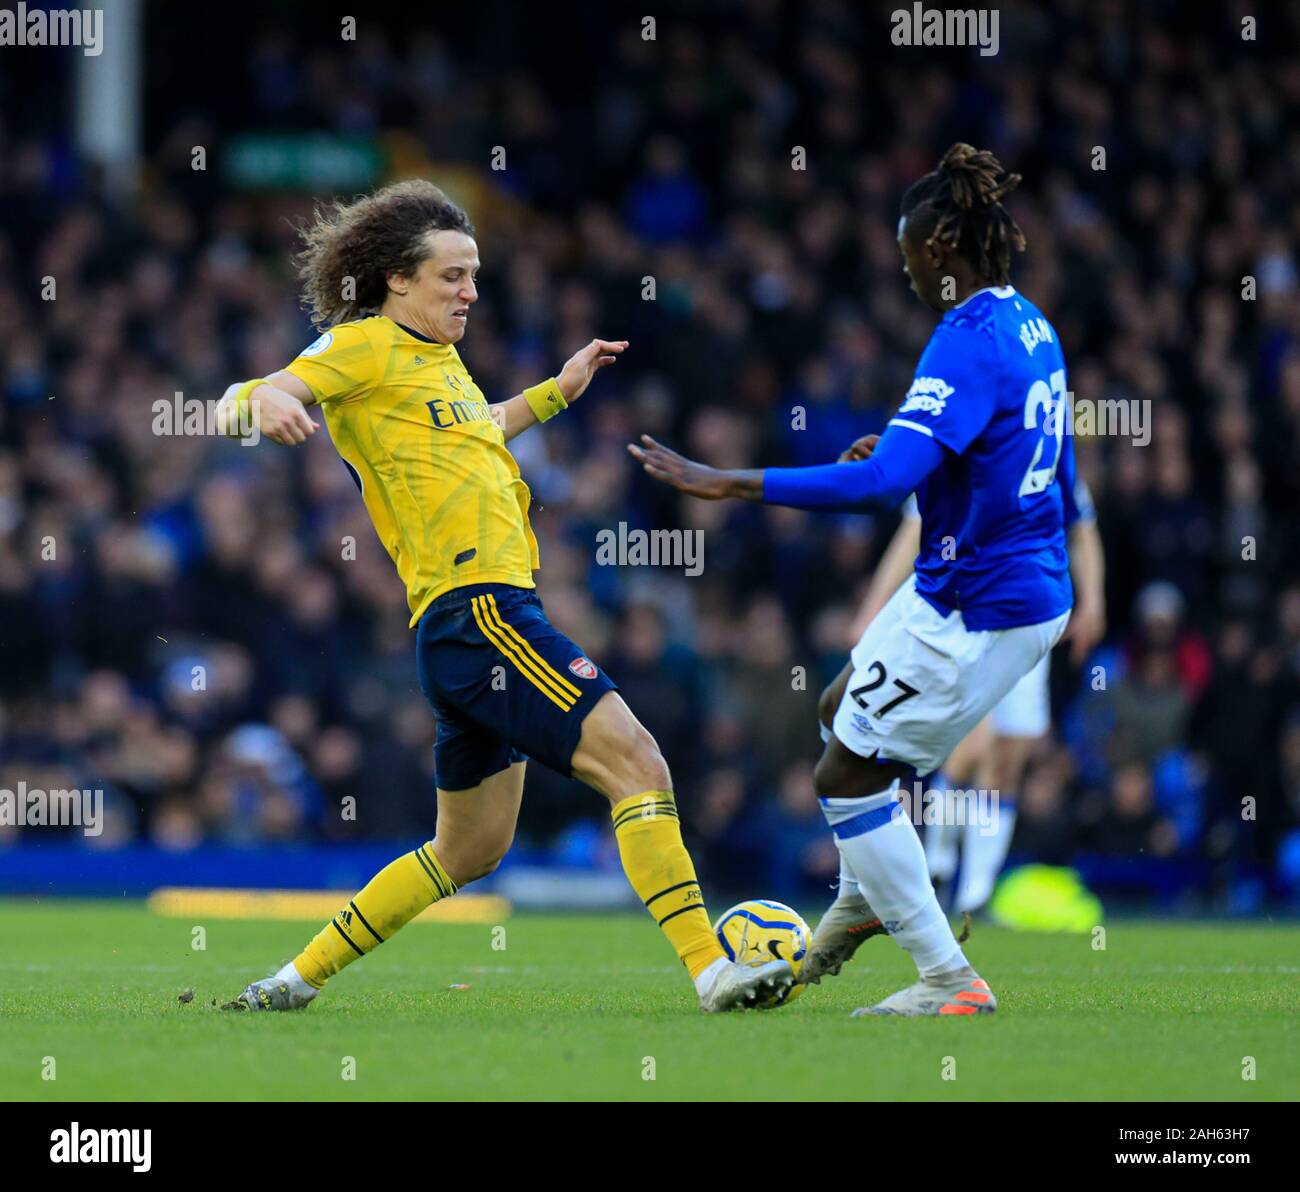 21st December 2019, Goodison Park, Liverpool, England; Premier League, Everton v Arsenal : David Luiz (23) of Arsenal challenges Moise Kean (27) of Everton for the ball Credit: Conor Molloy/News Images Stock Photo